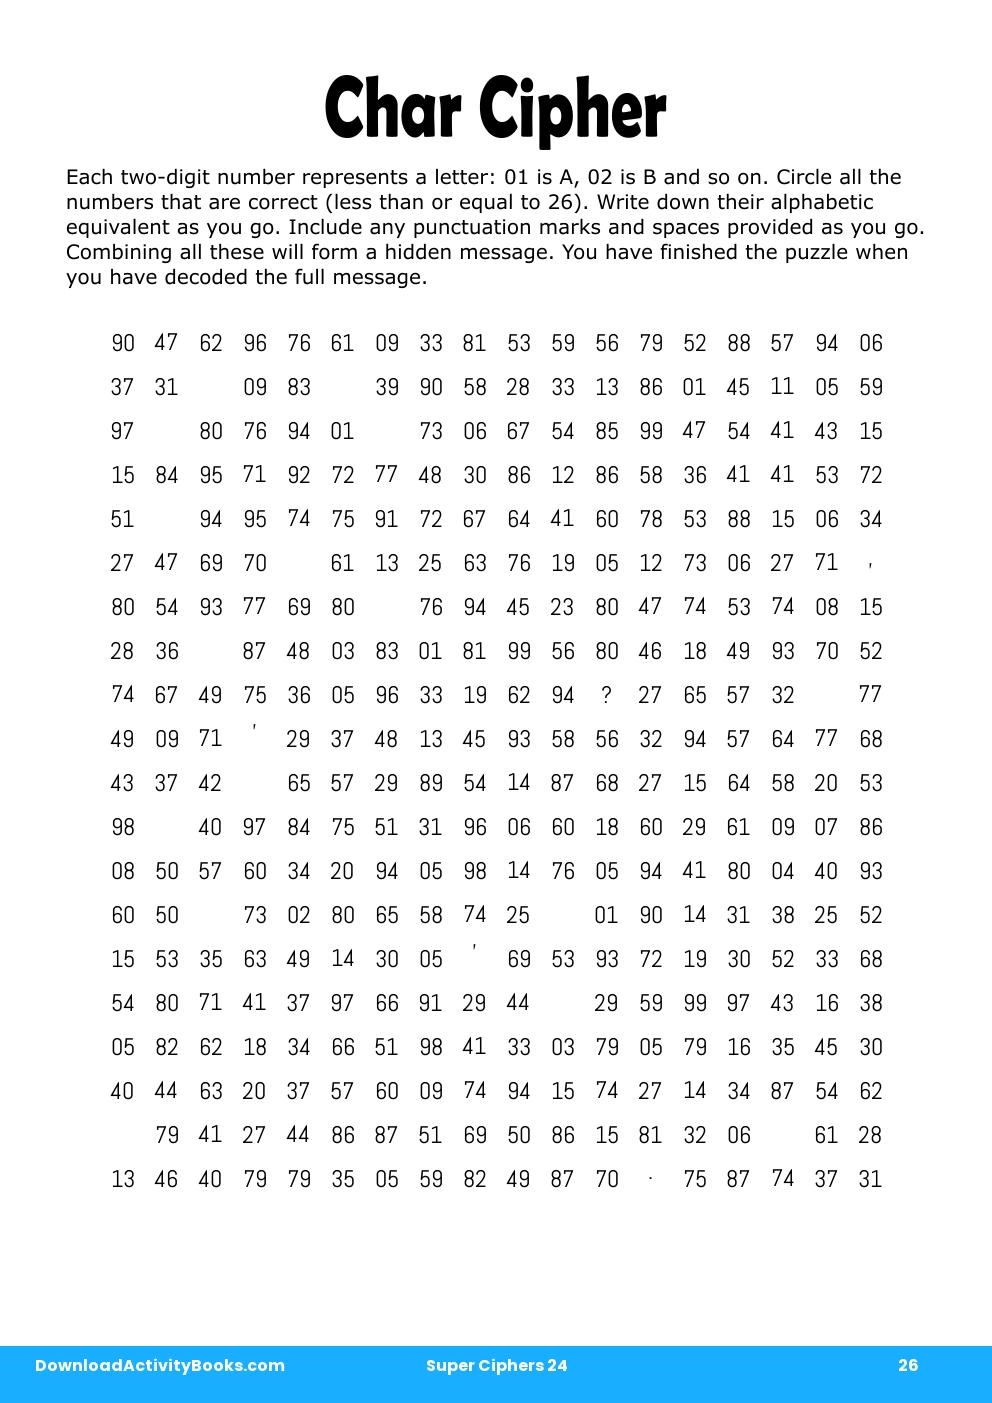 Char Cipher in Super Ciphers 24